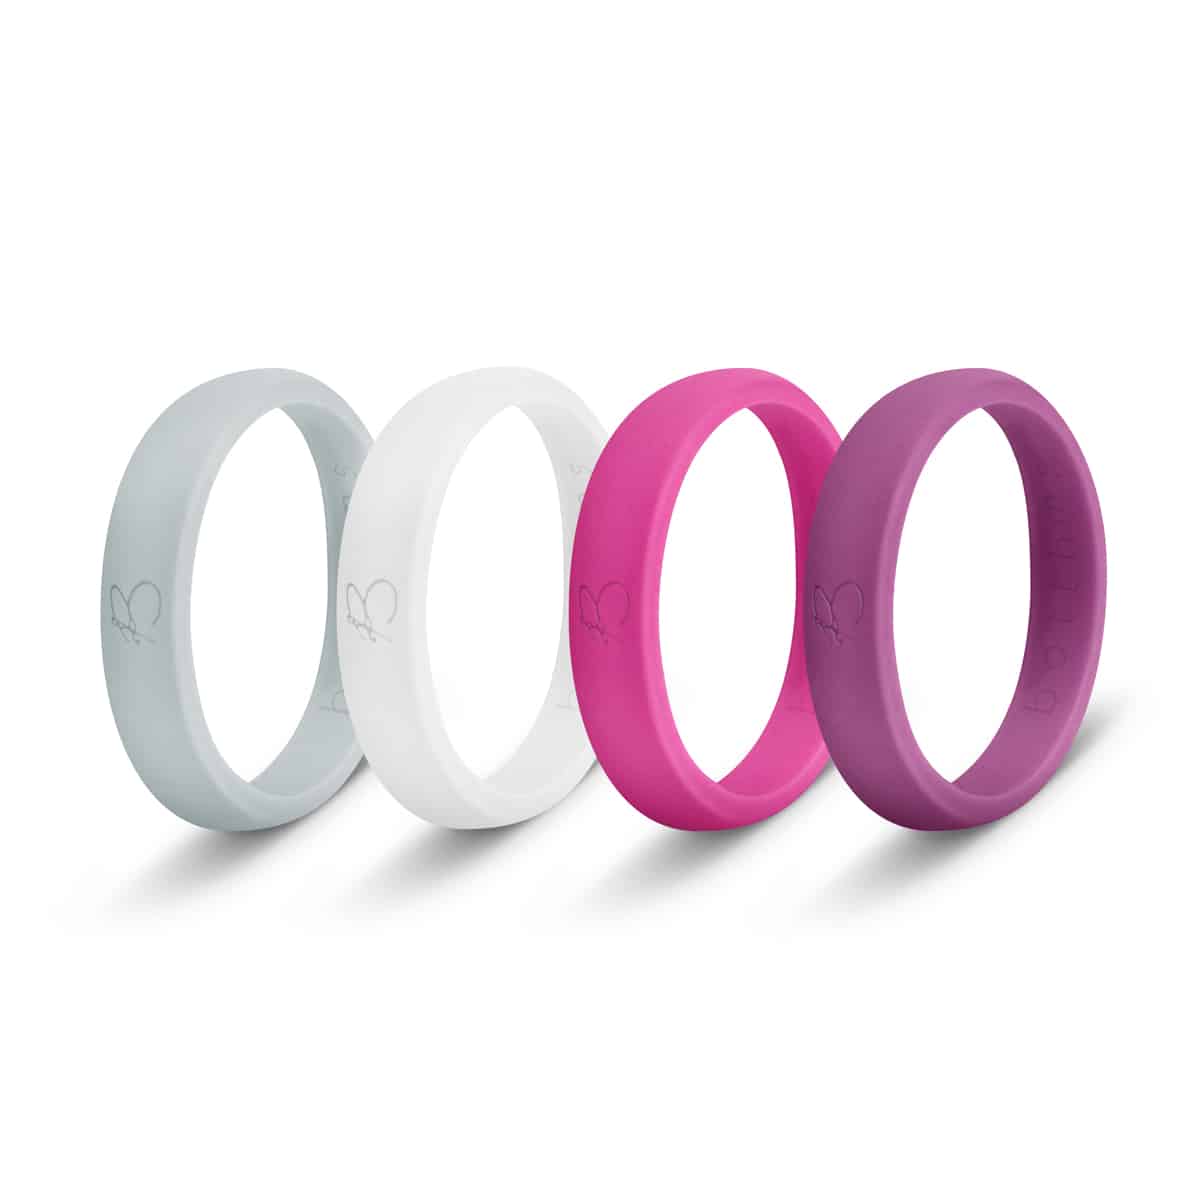 botthms Ladies Silicone Rings Combo Pack - 4